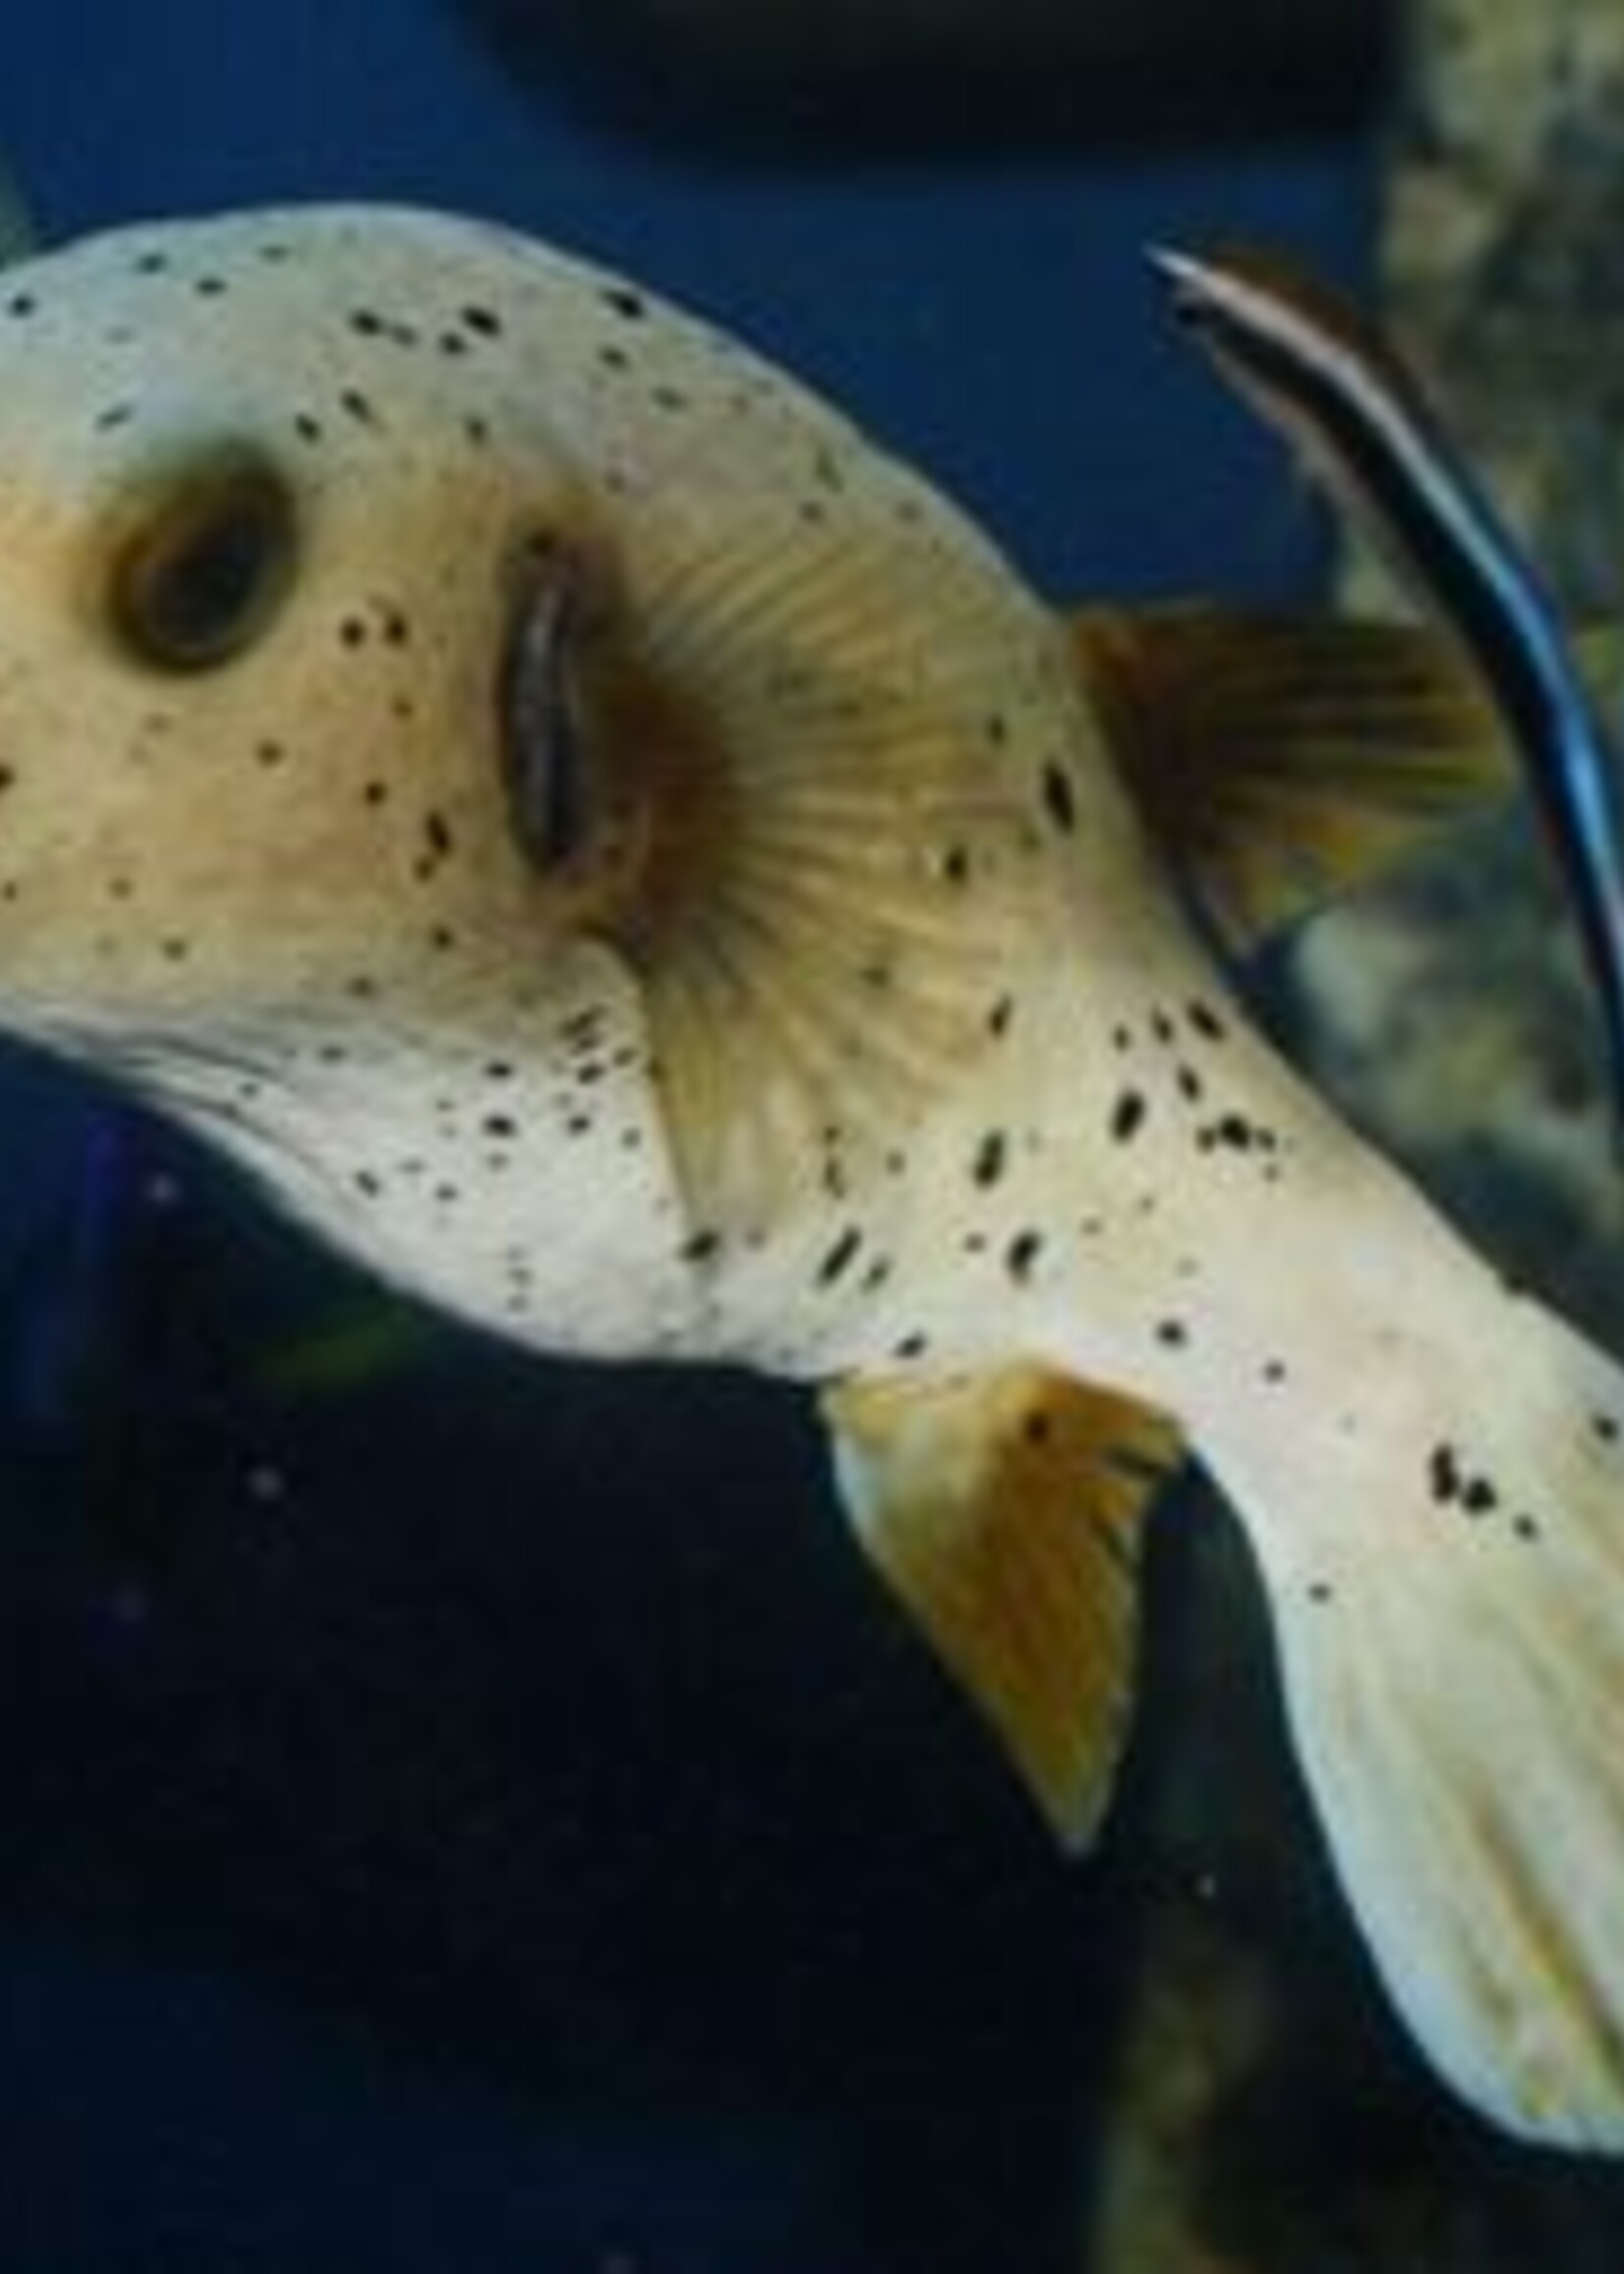 Dogface Puffer MD